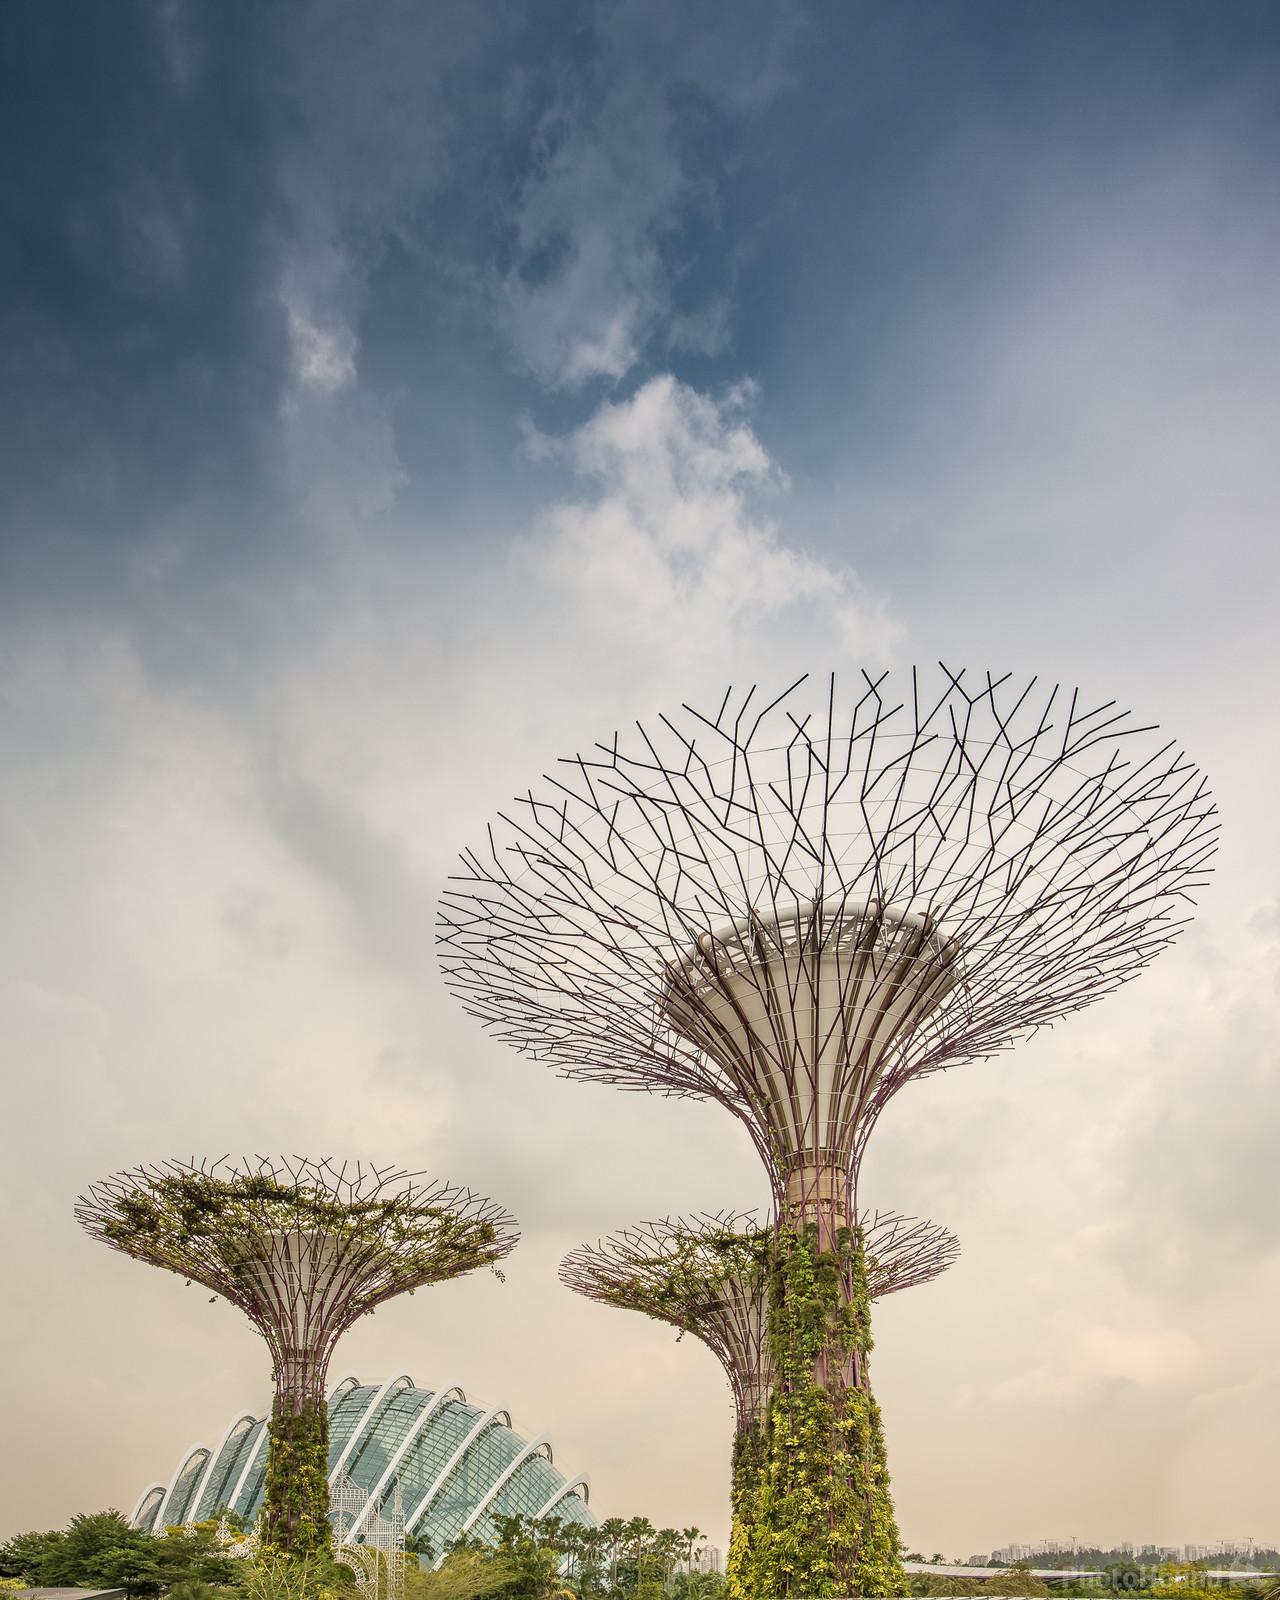 Image of Supertree Grove by Mathew Browne